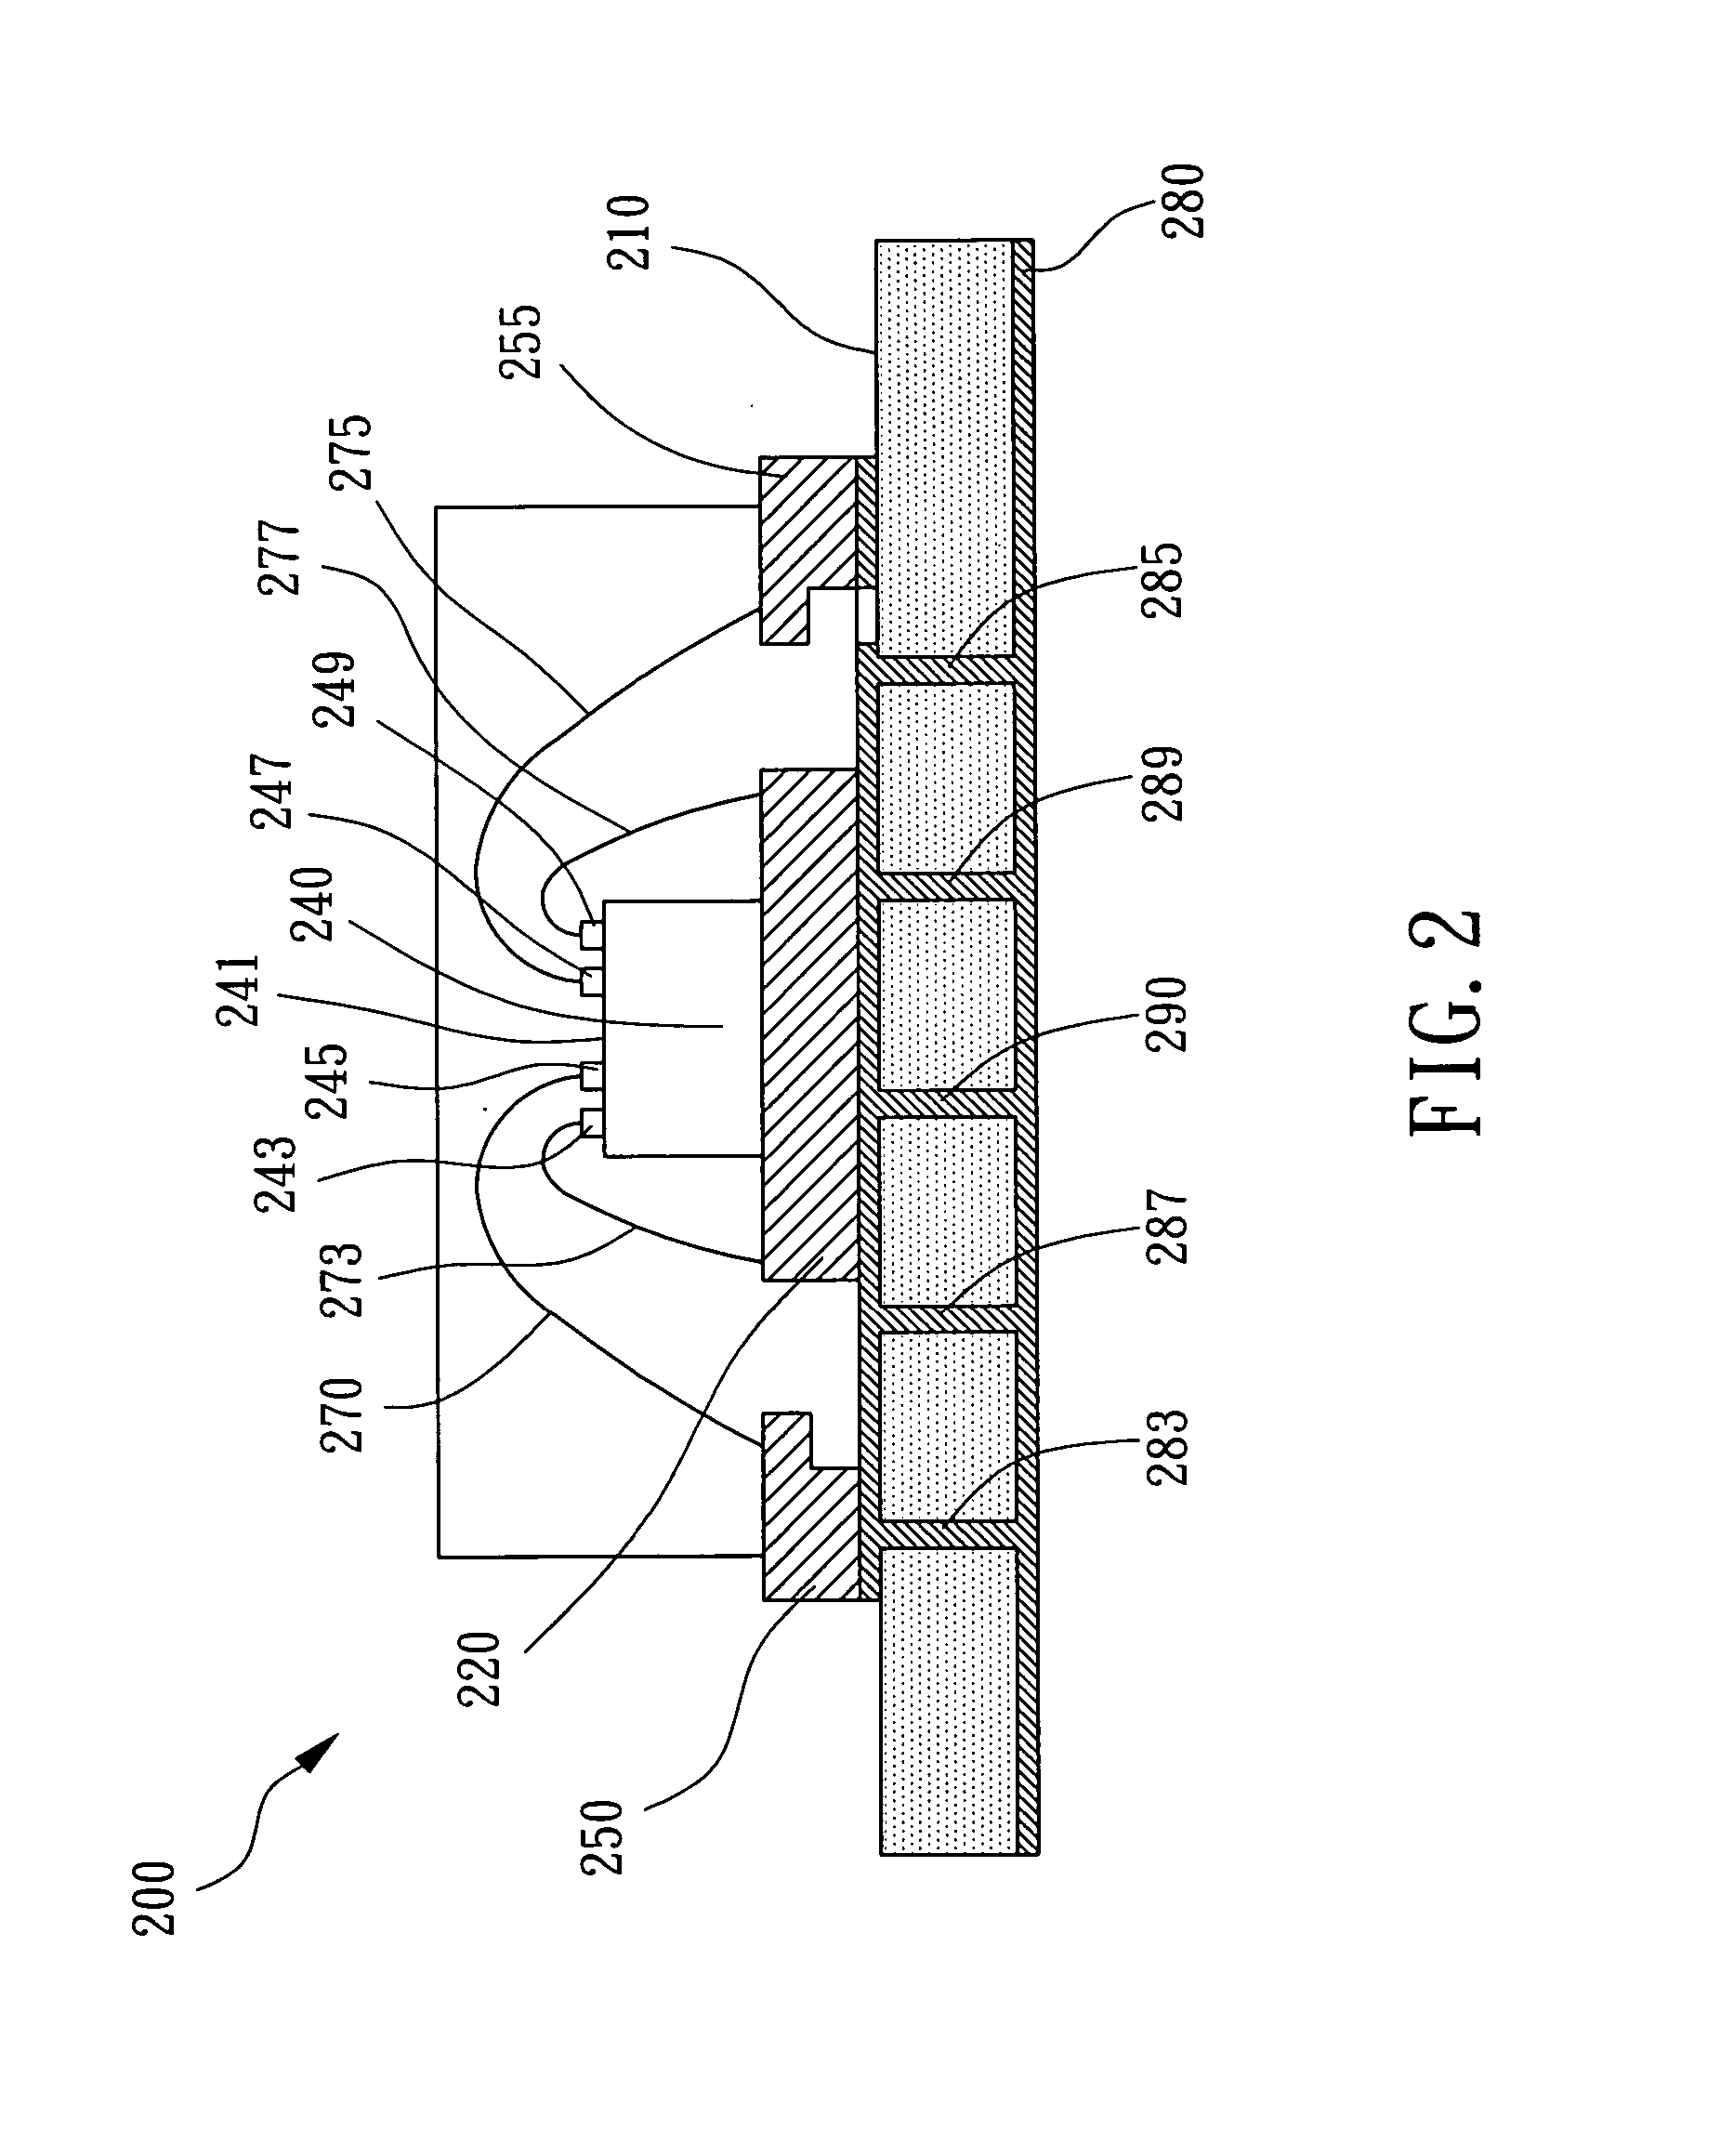 Structure of multi-tier wire bonding for high frequency integrated circuit